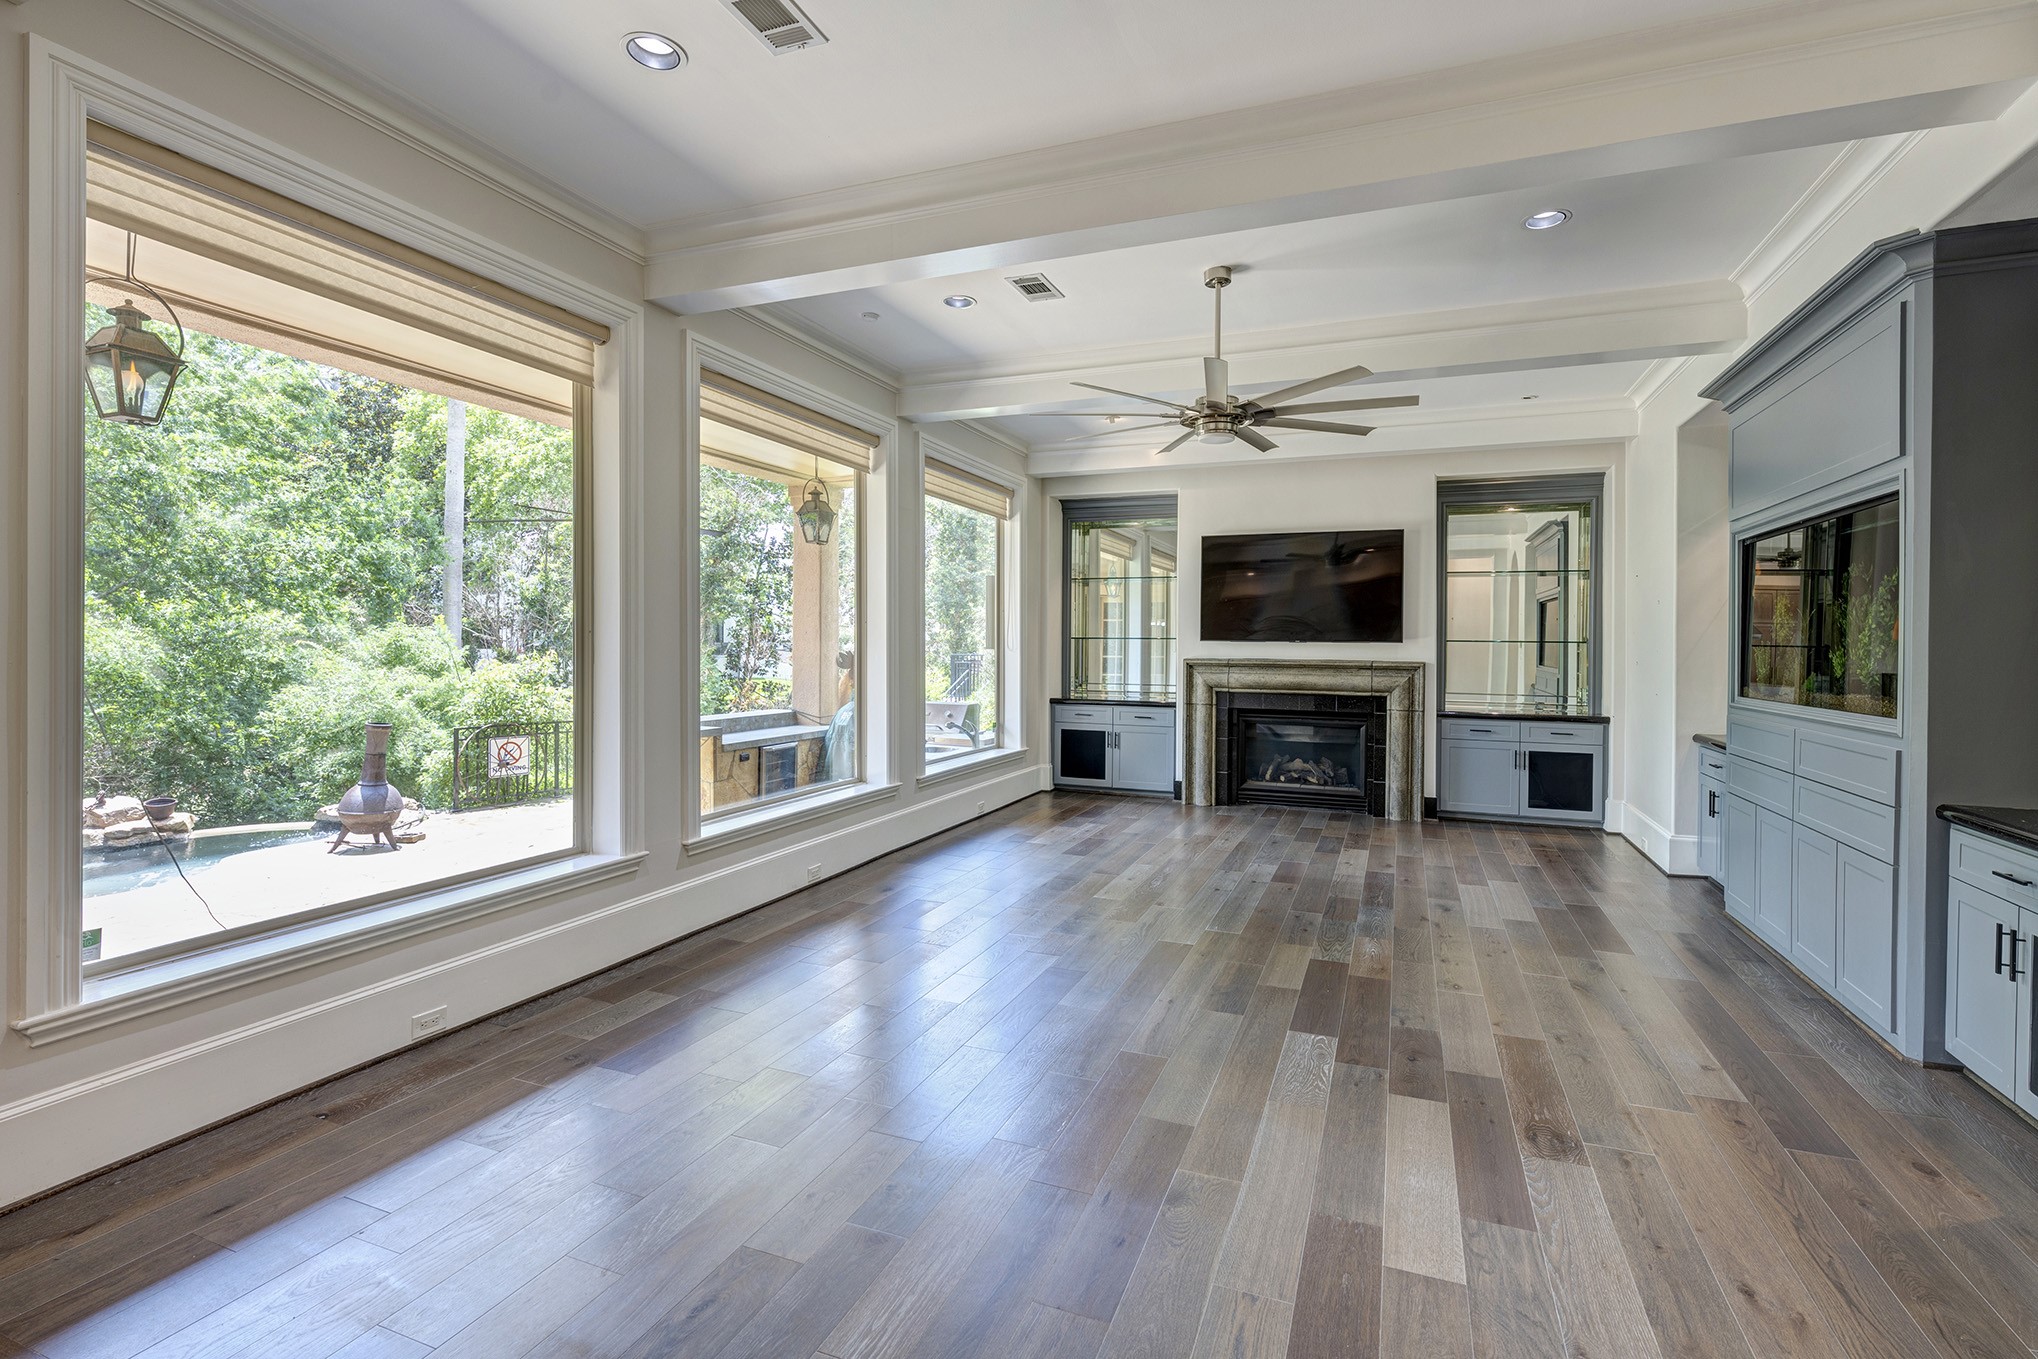 Living room with hardwood floors, fireplace, custom built-ins and wall of windows that look out to the picturesque backyard.